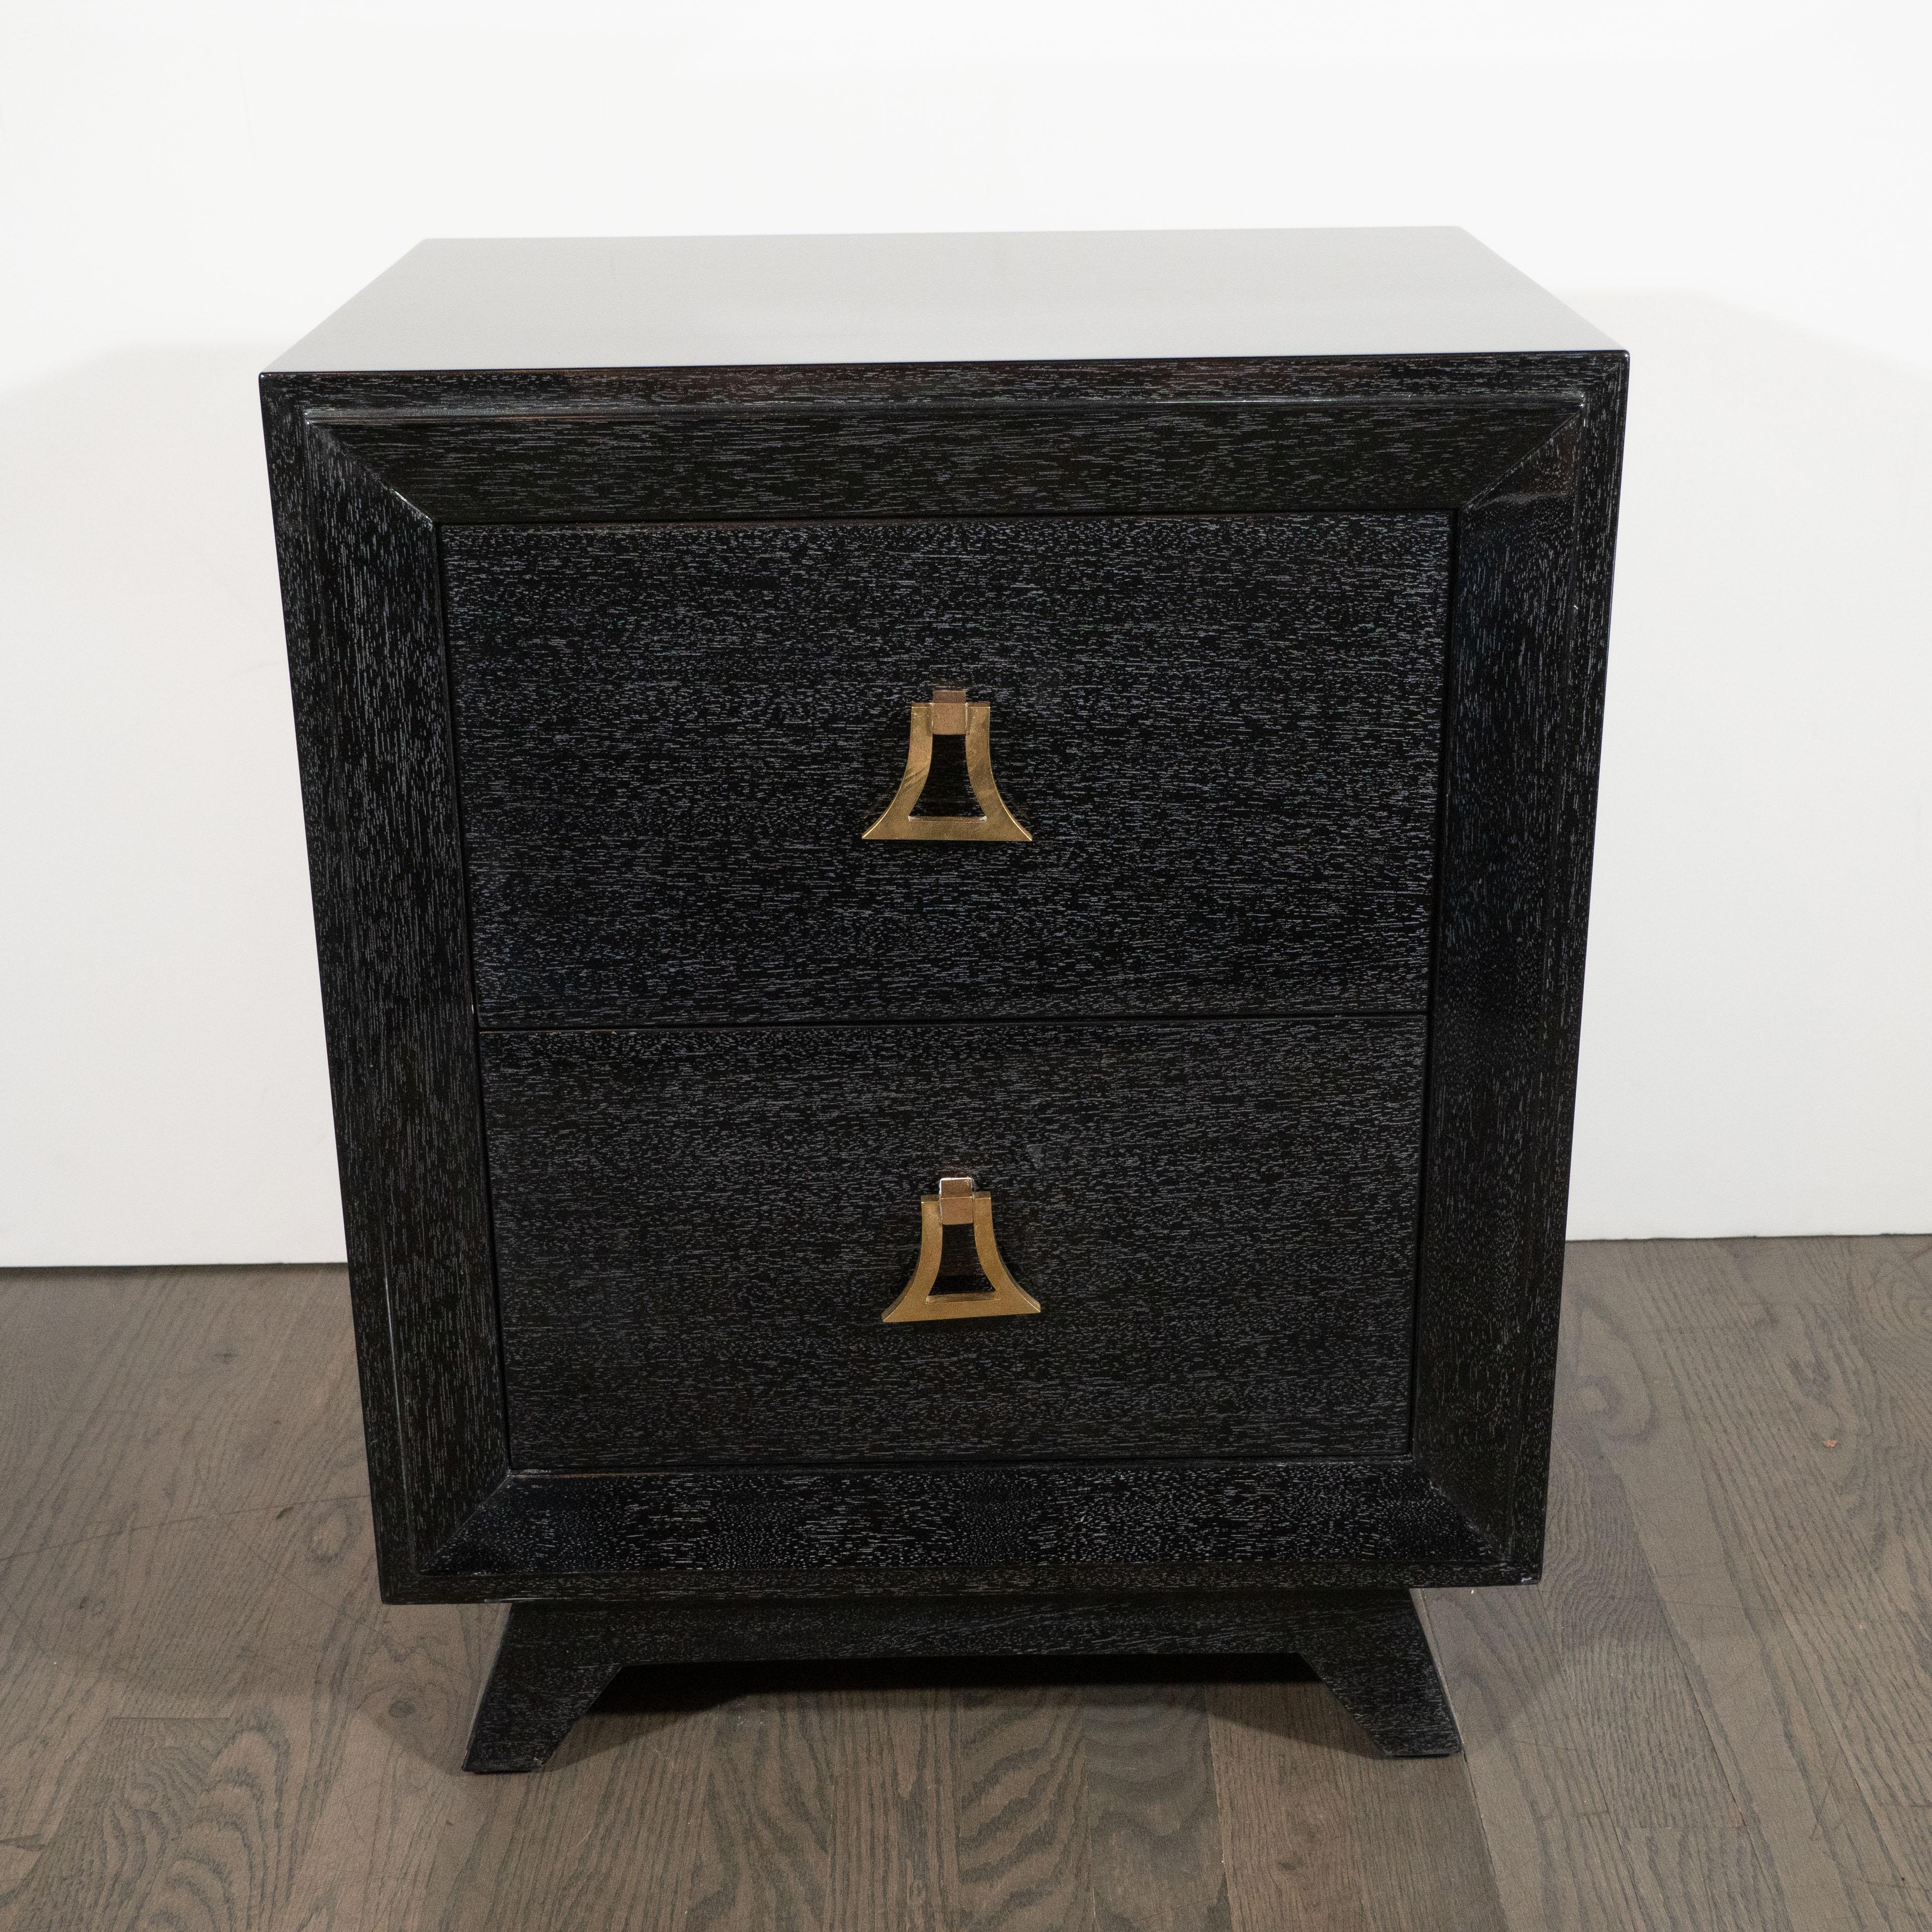 This elegant pair of silver cerused shadowbox mahogany nightstands were realized in the United States, circa 1950. They feature two spacious drawers each fitted with a pair of stylized pagoda style brass pulls. The nightstands sit on rectangular